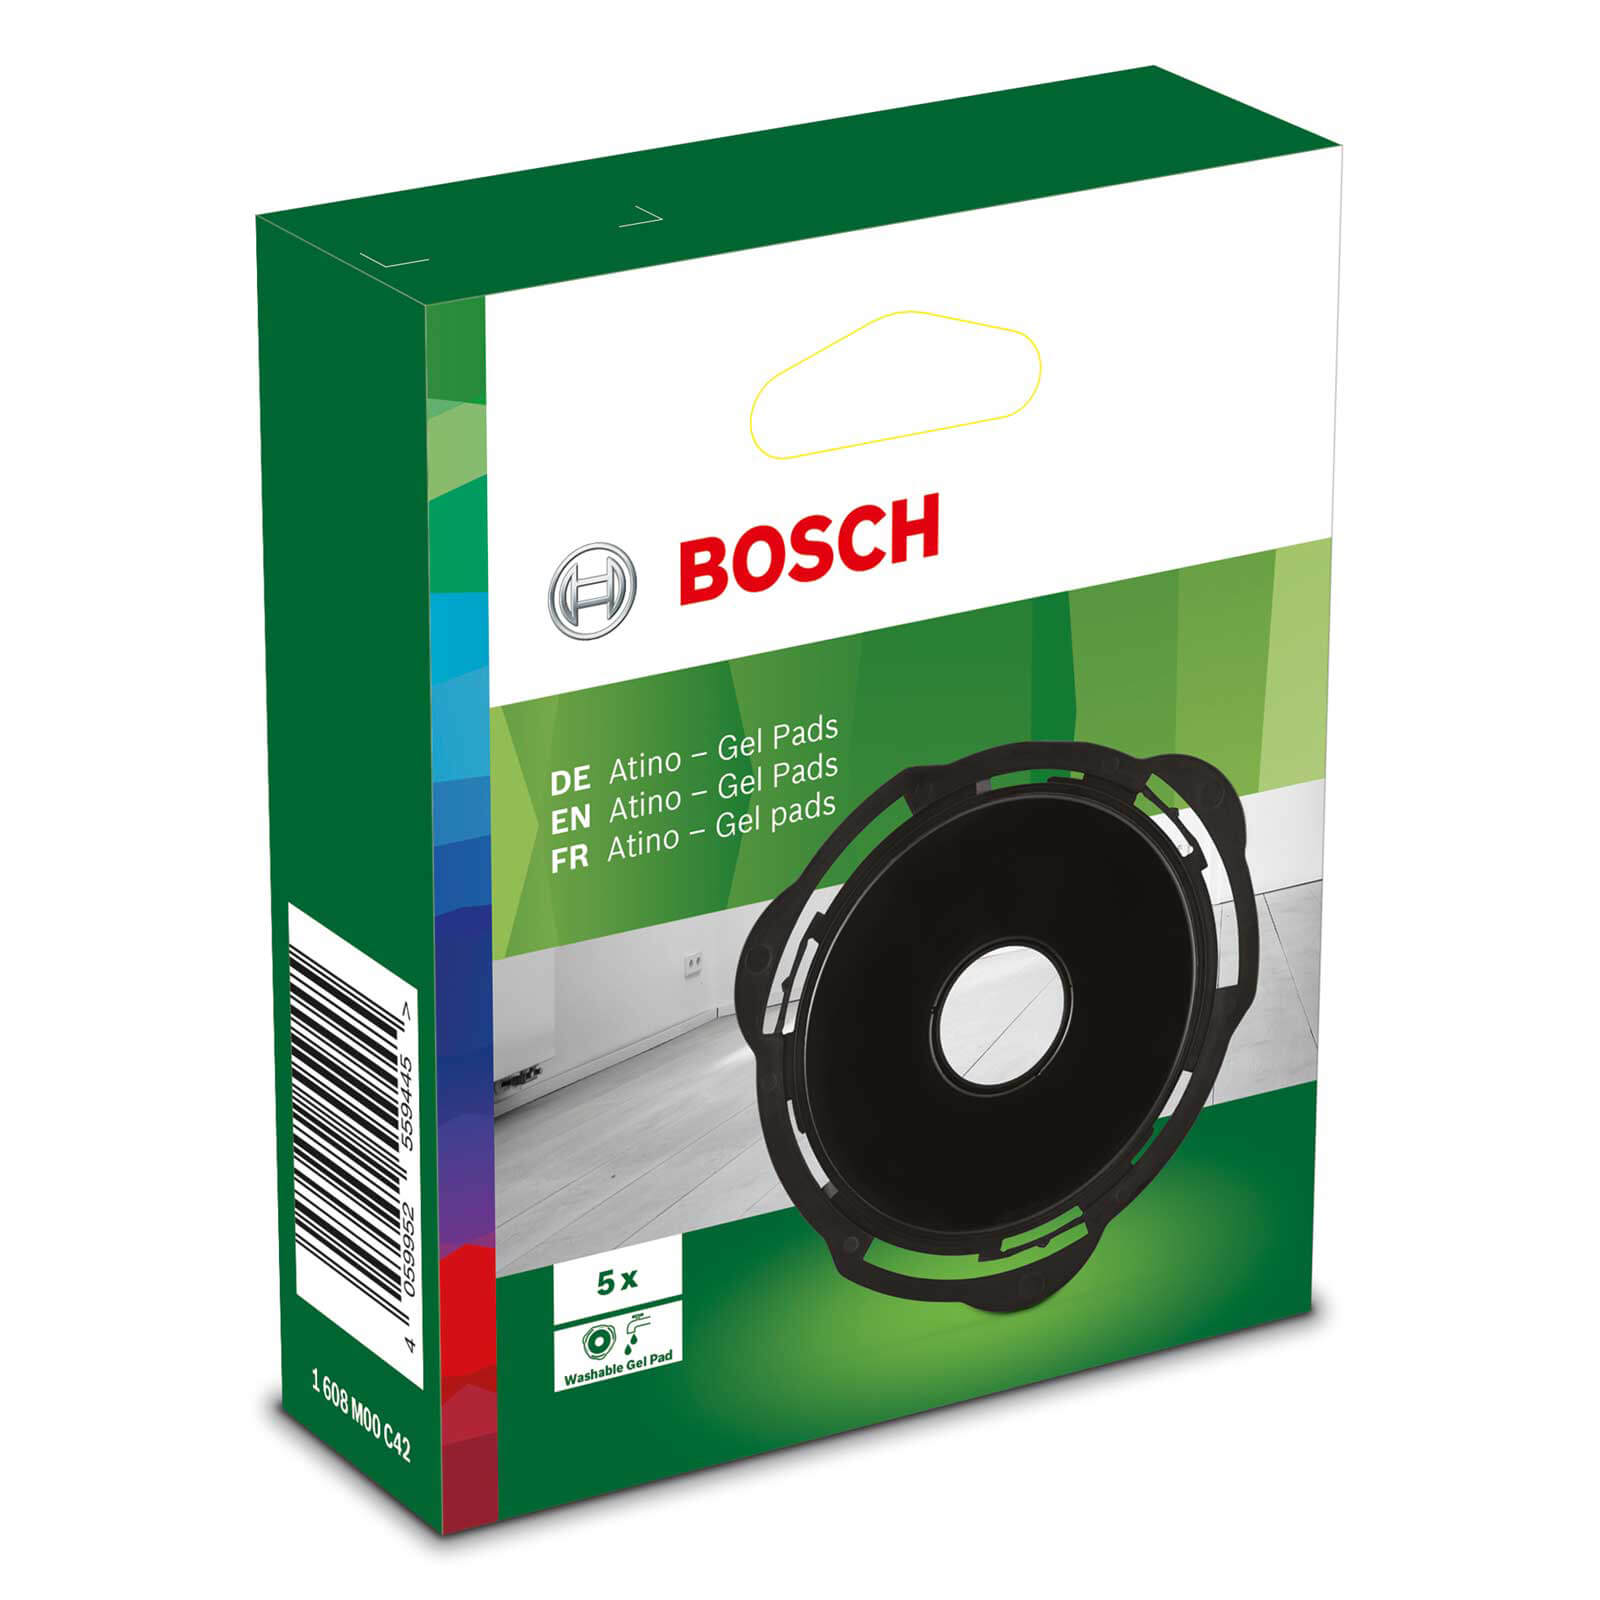 Image of Bosch ATINO Gel Pads Pack of 5